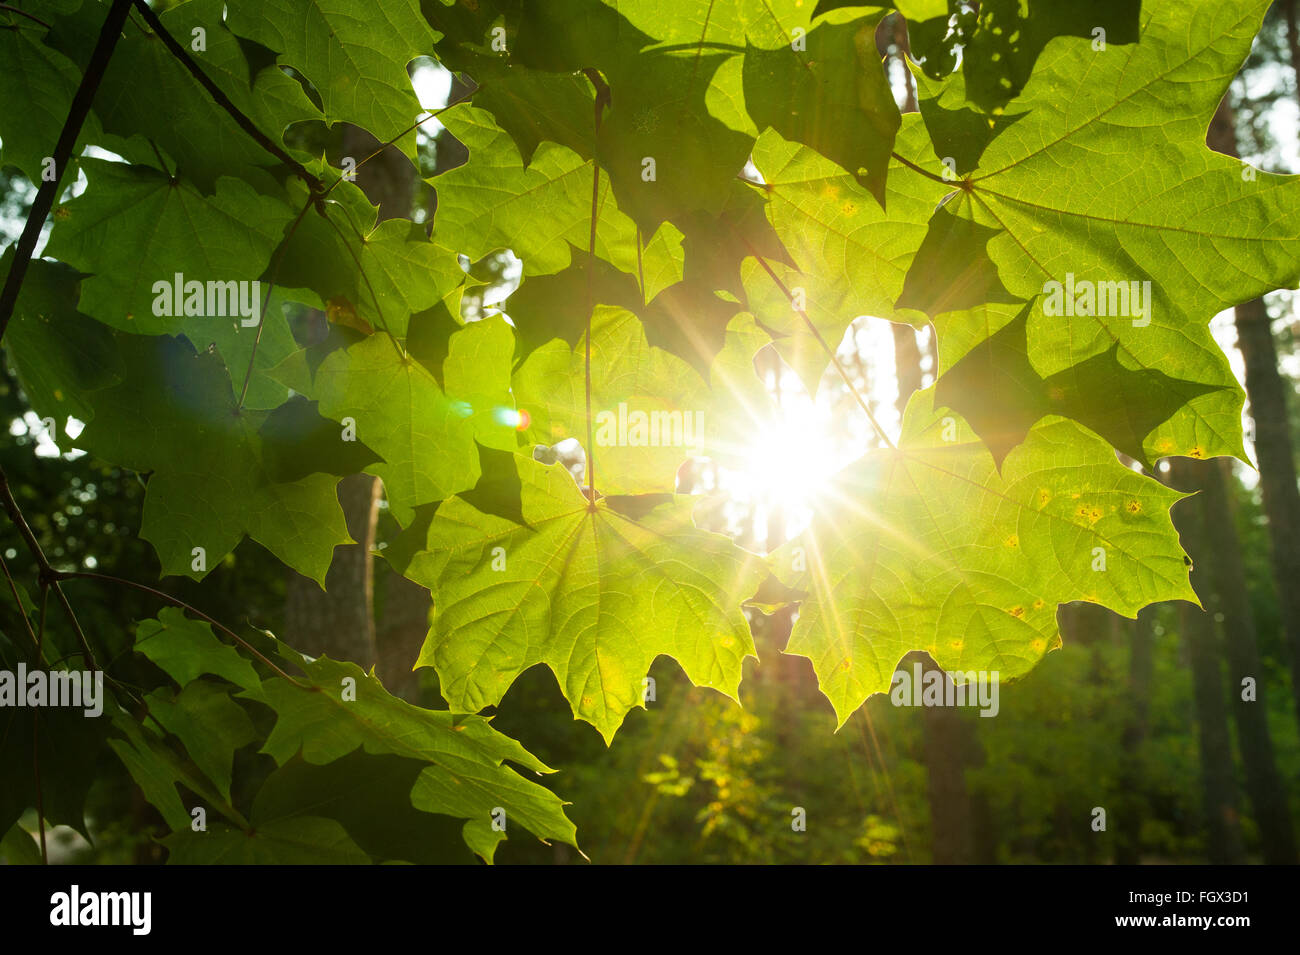 Sunbeams breaking through clouds and light up maple leaves Stock Photo